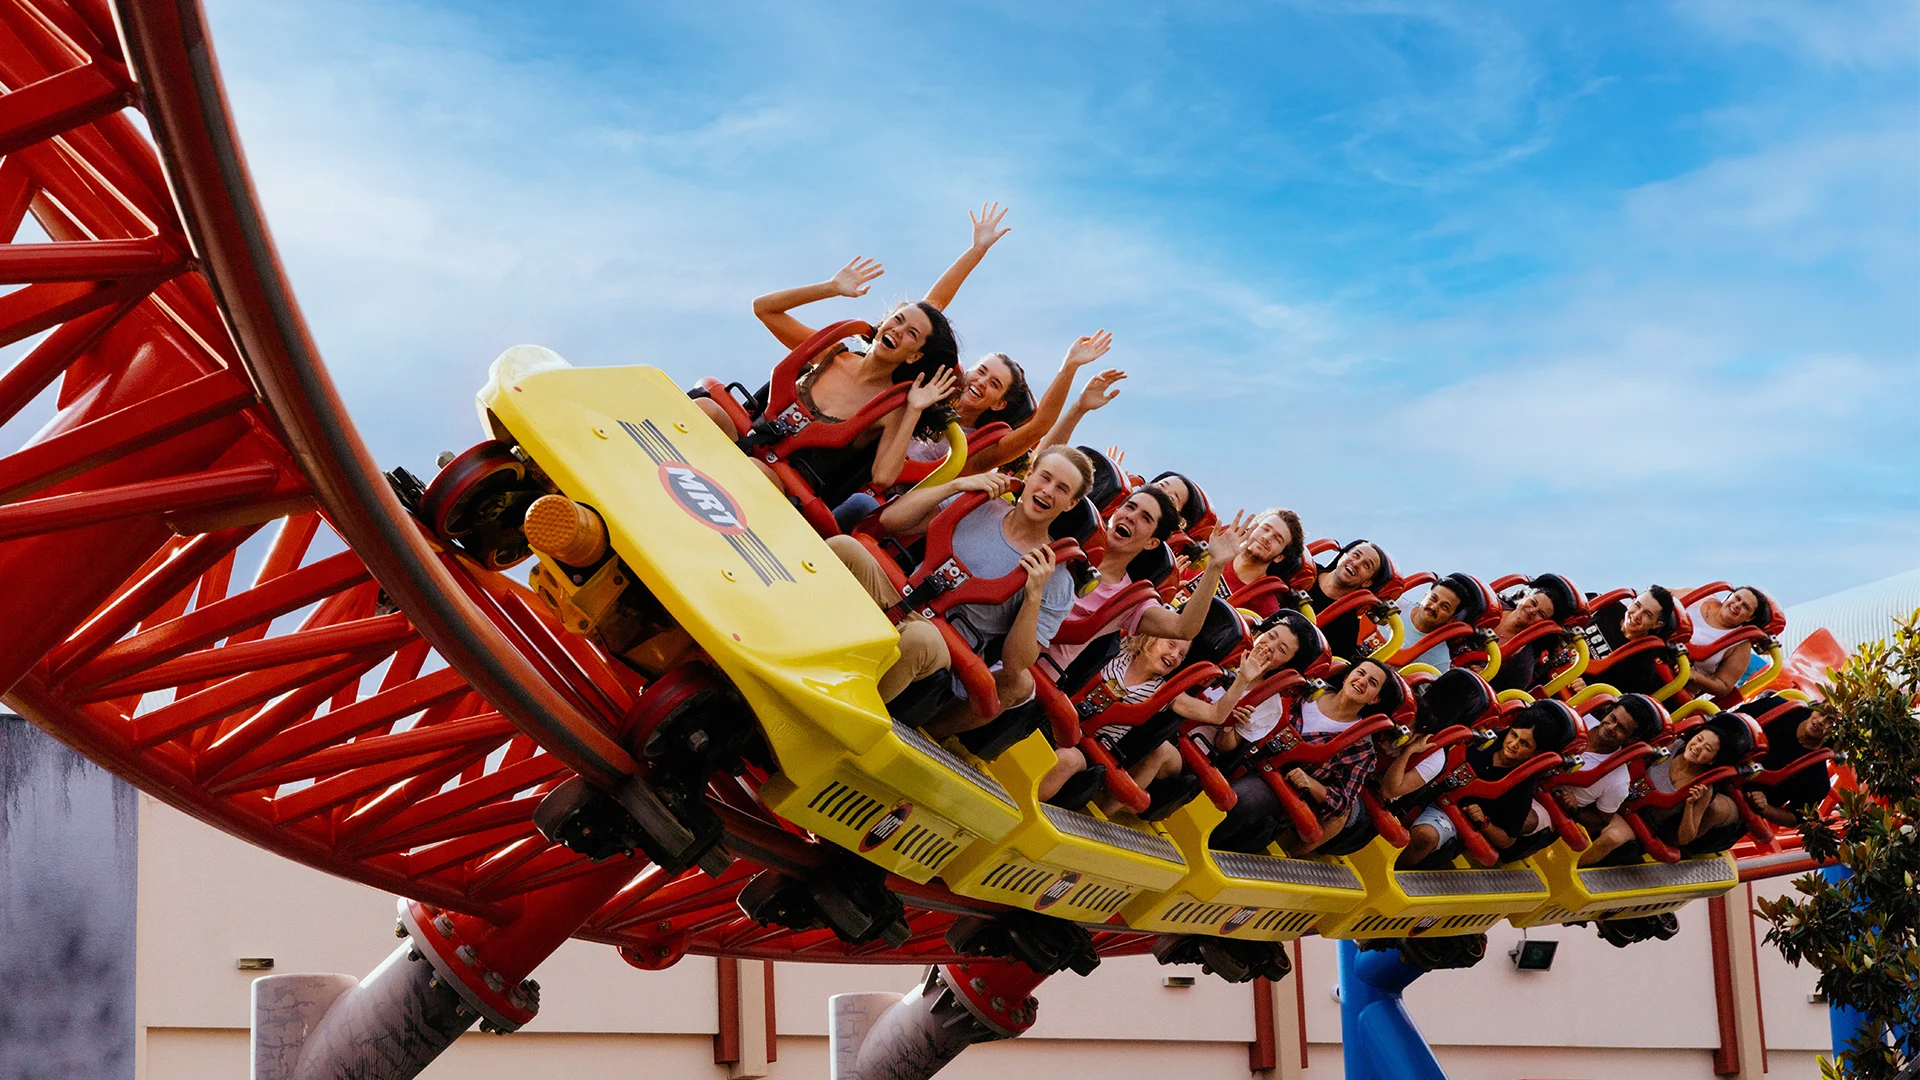 A group of people riding a red and yellow roller coaster, some with their hands raised and expressions of excitement as it rounds a curve under a blue sky.